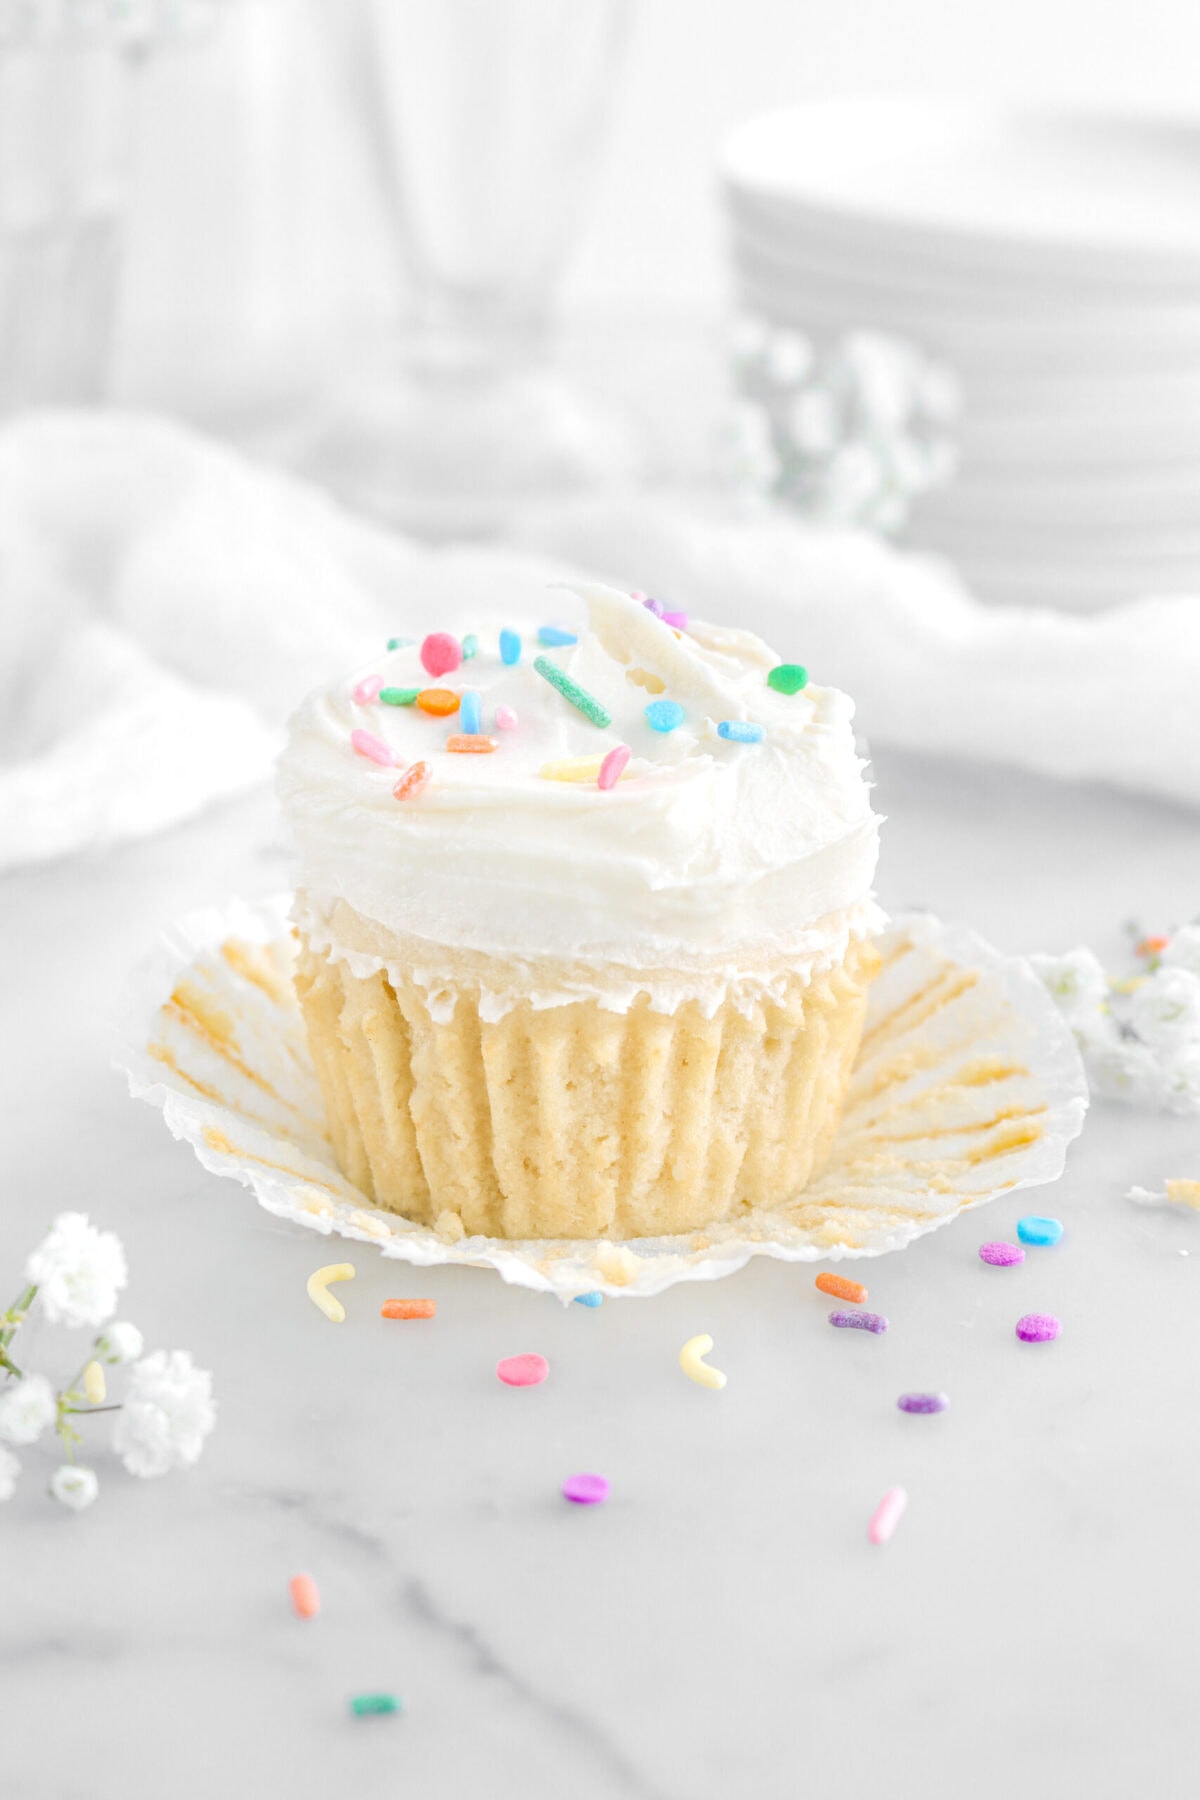 vanilla cupcake with paper peeled away on marble surface with rainbow sprinkles and white flowers around.